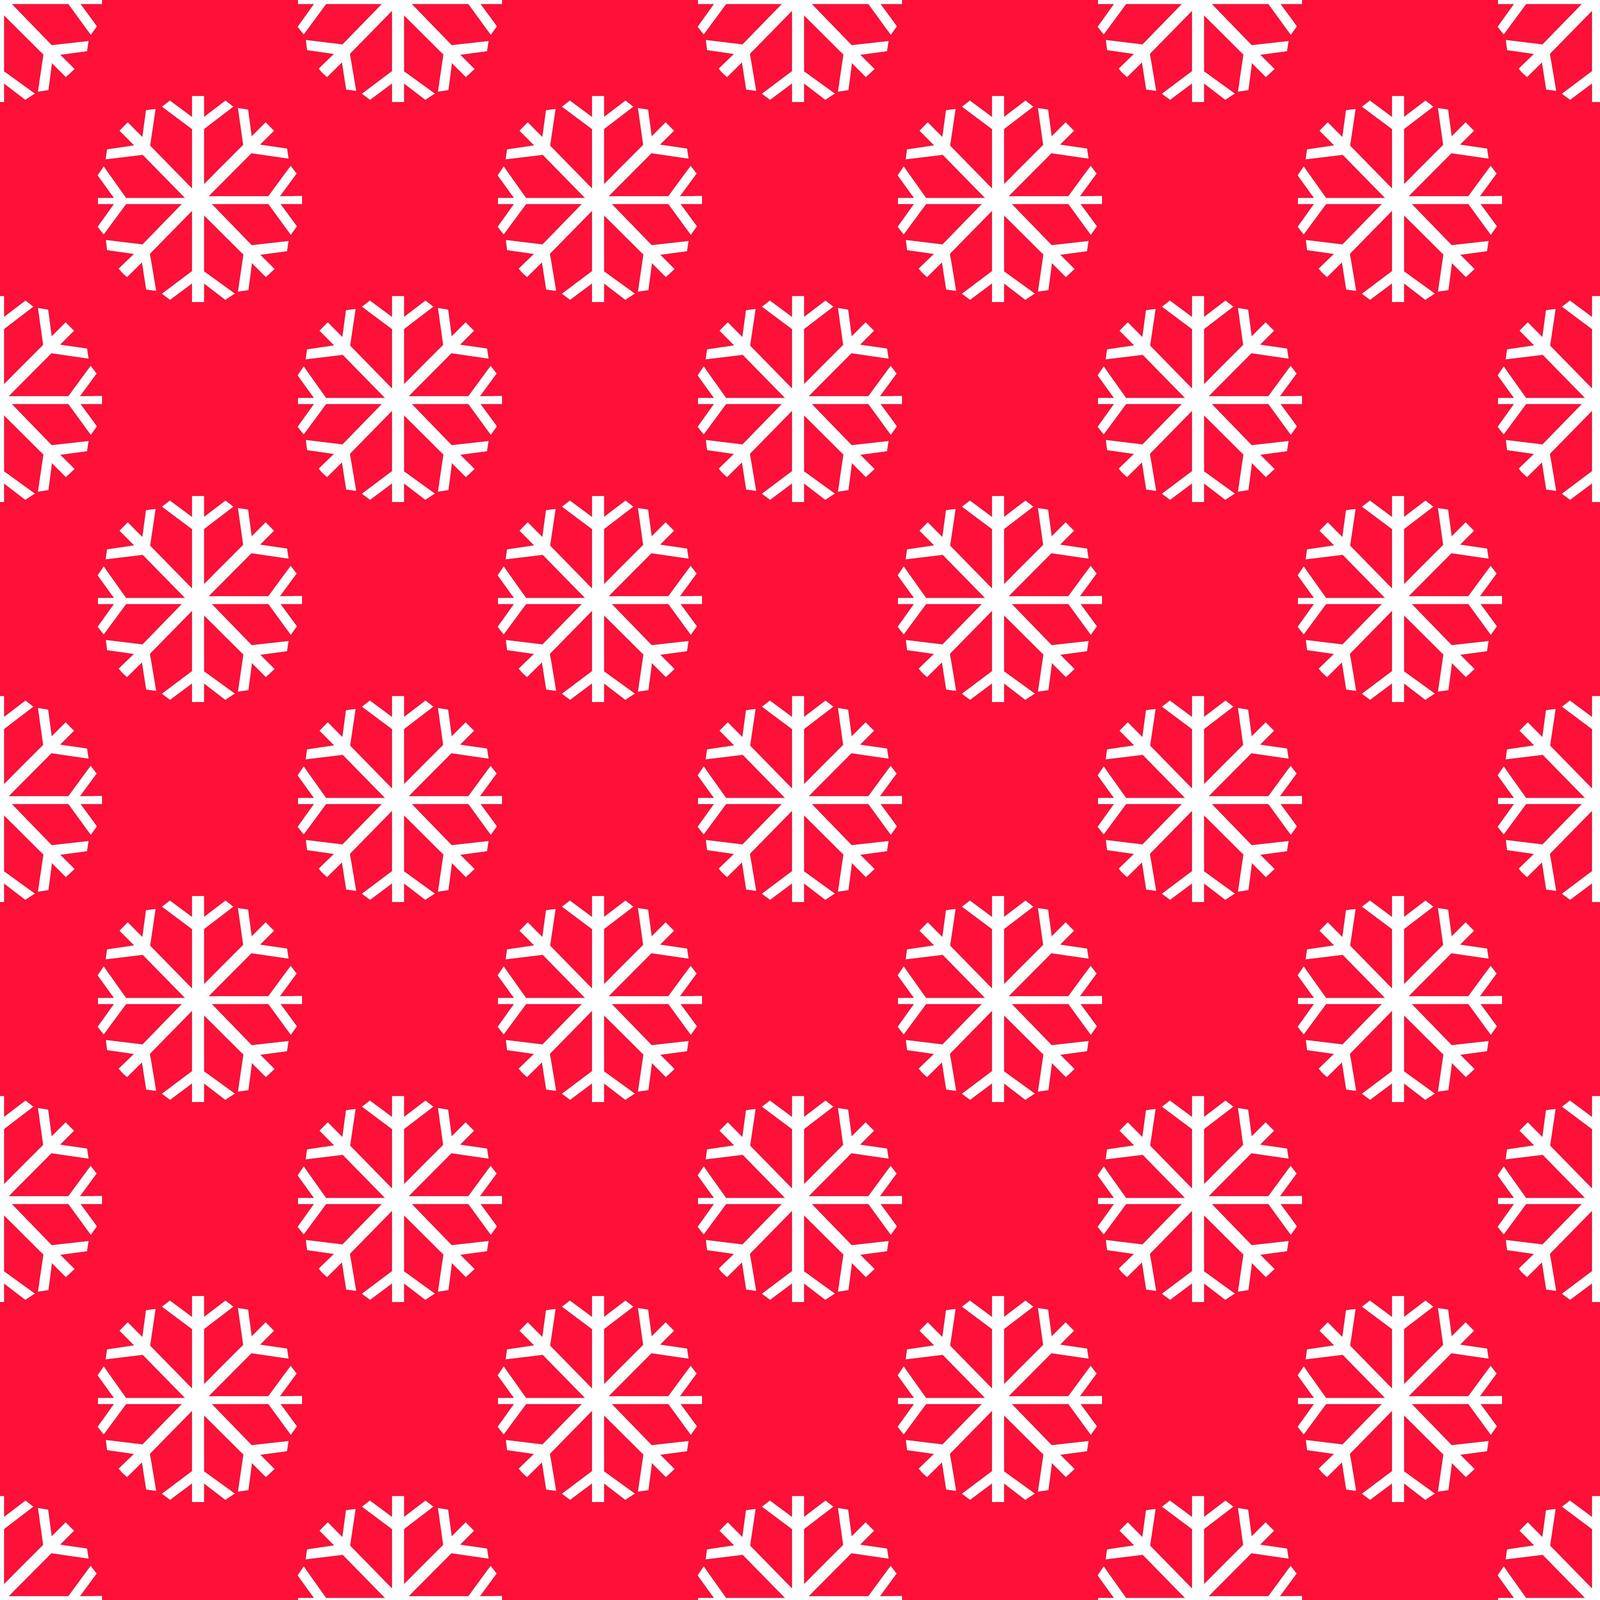 Snowflake Pattern - Snowflake vector pattern. Each snowflake is grouped individually for easy editing. EPS